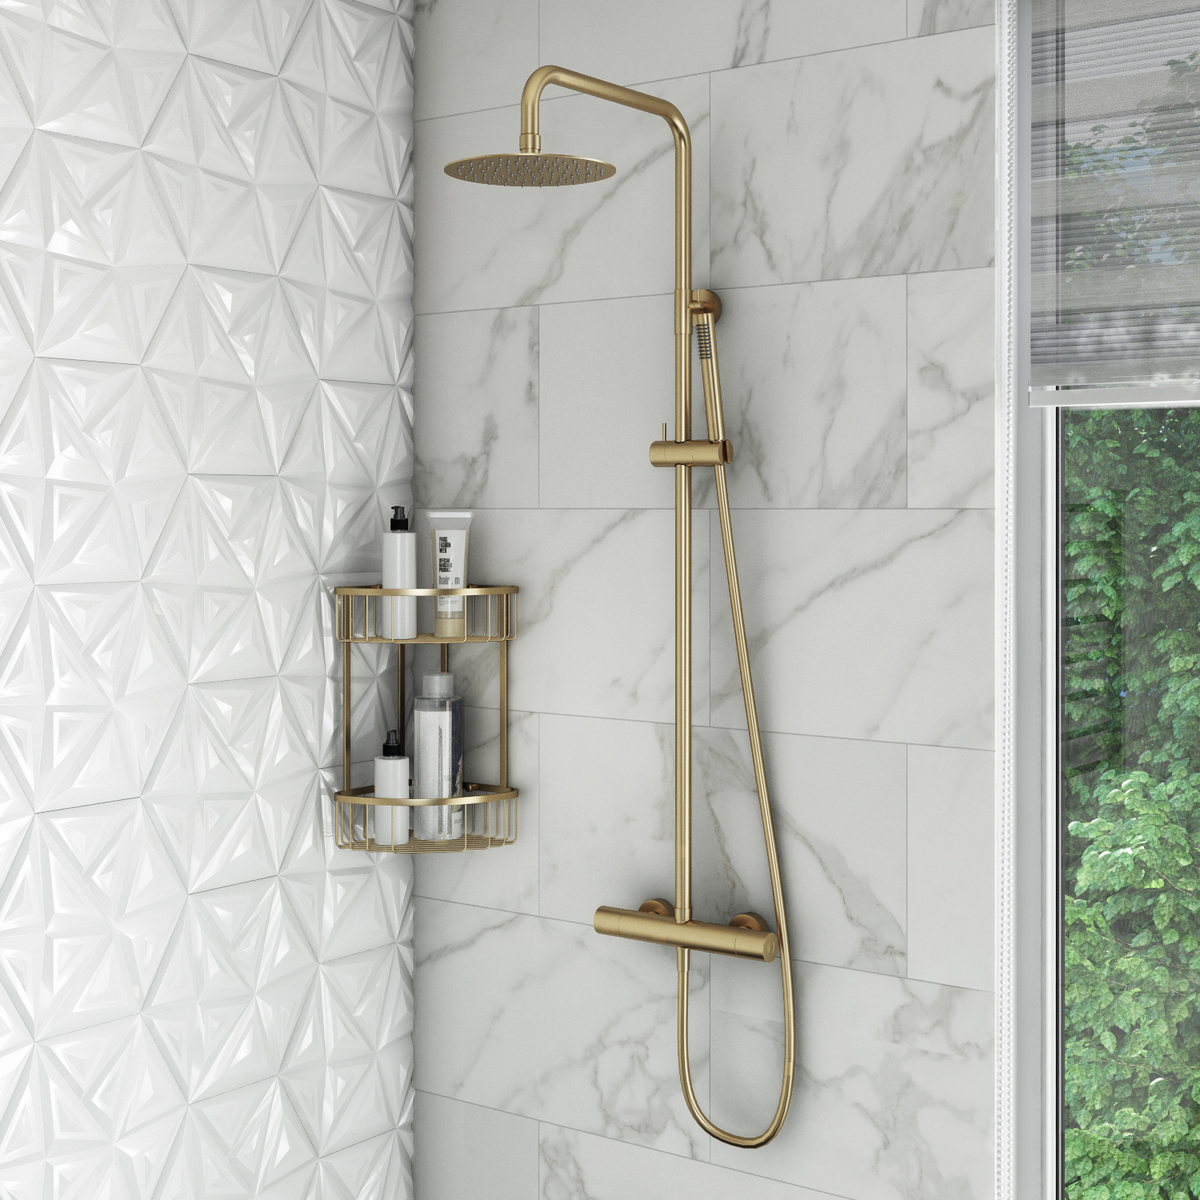 Modern bathroom with brass shower set with exposed valve and corner shower caddy.